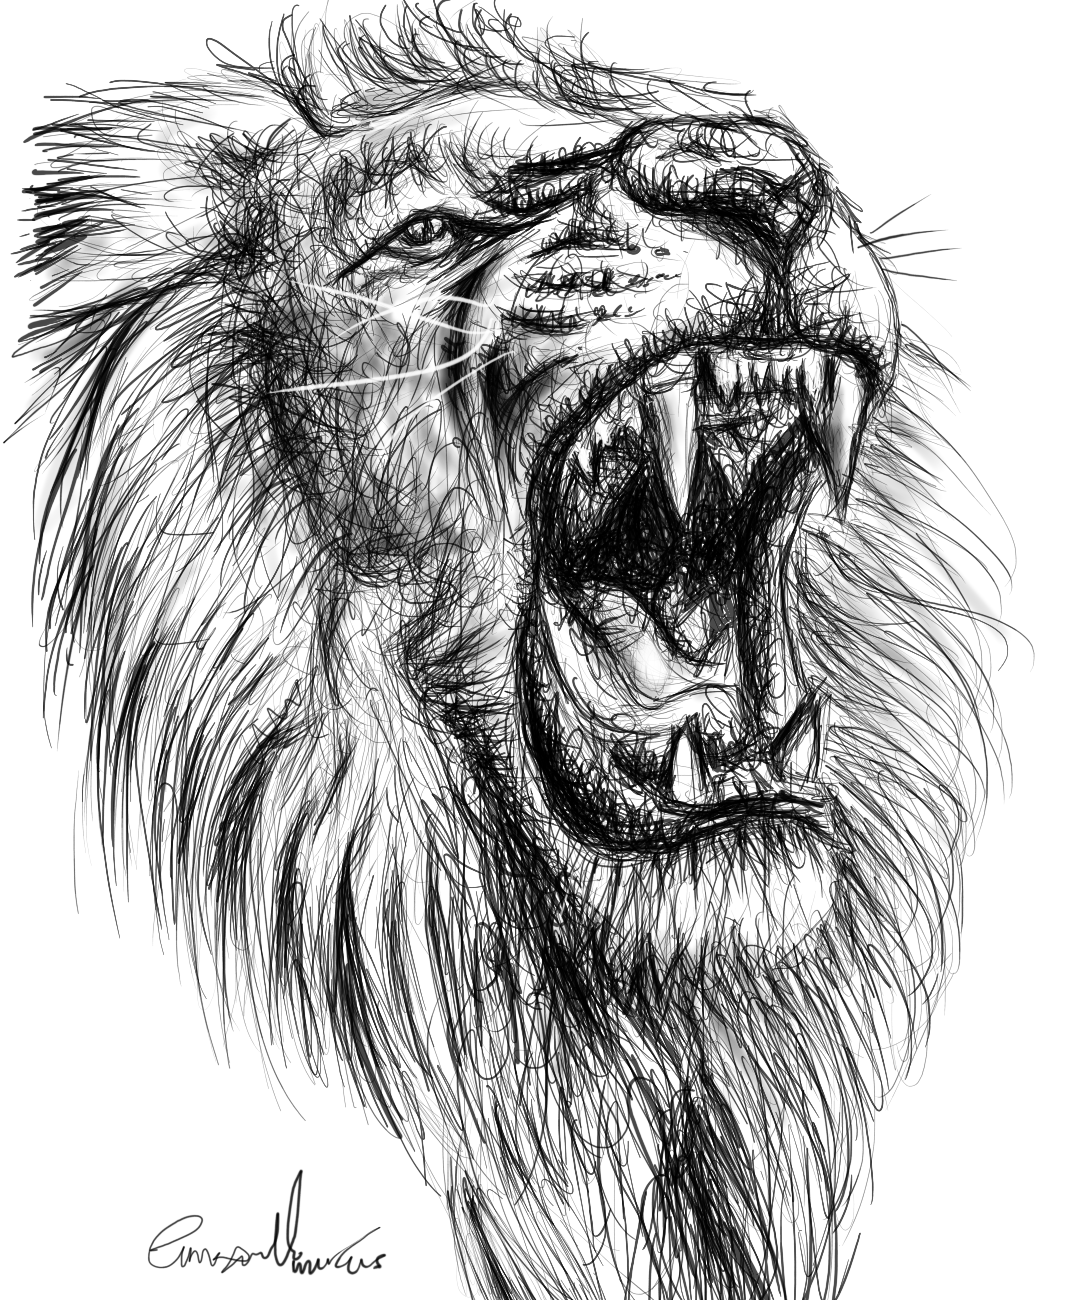 Roaring Lion drawing easy || How to draw A Lion drawing easy - YouTube-saigonsouth.com.vn